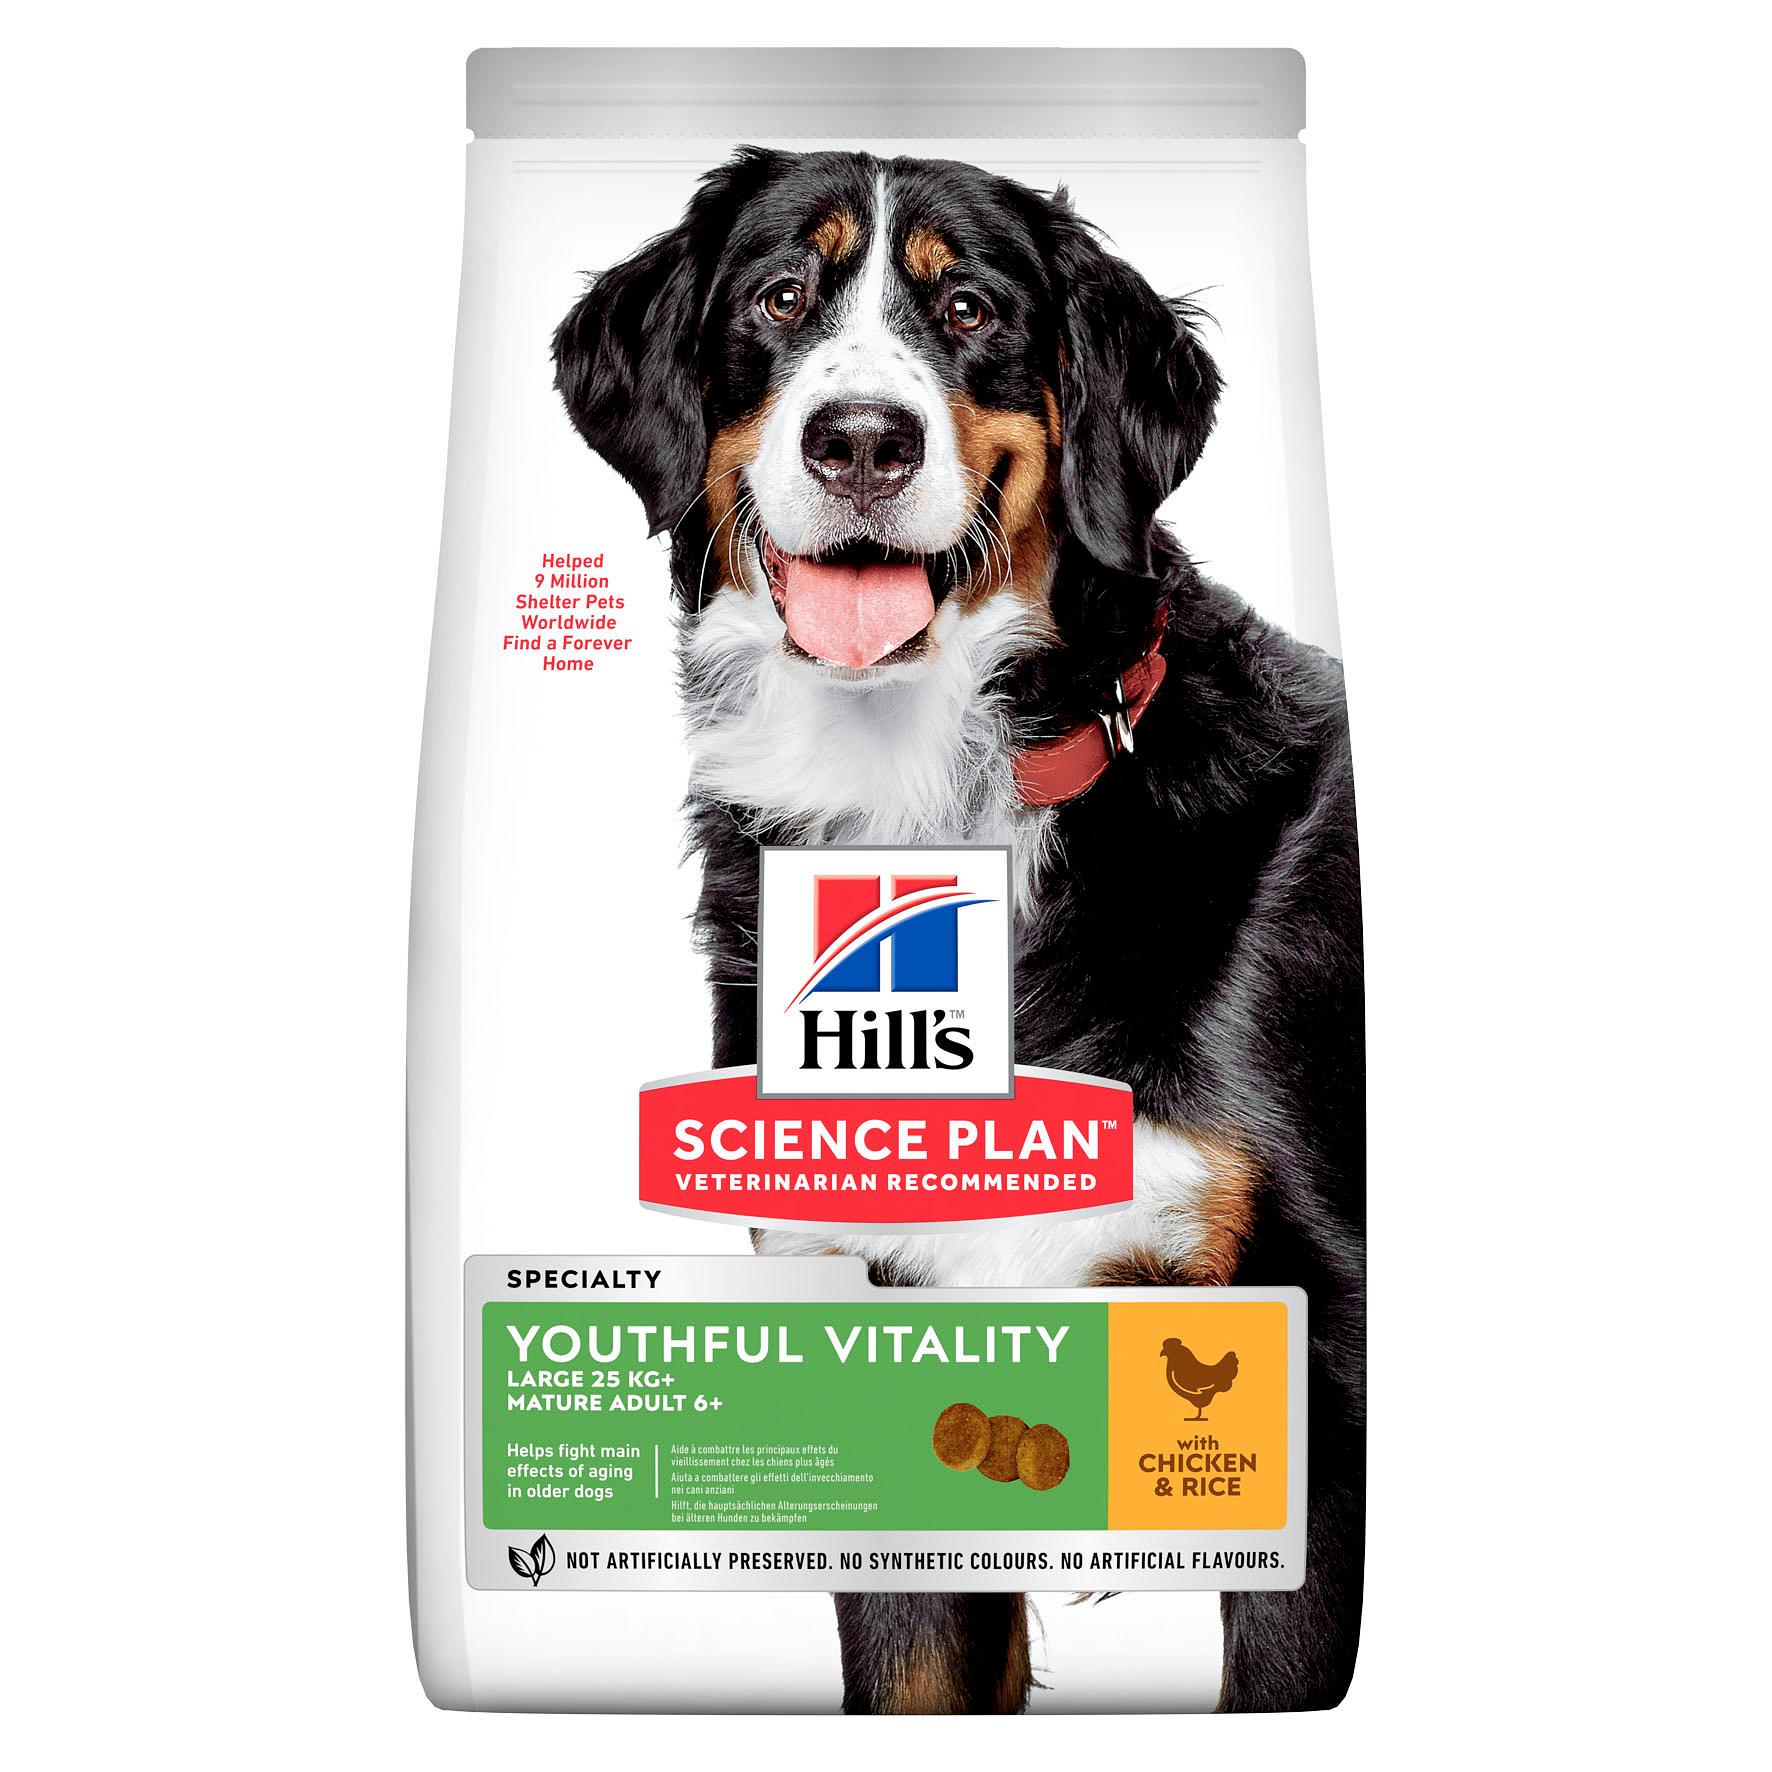 Hill’s Science Plan Adult 5+ Youthful Vitality, Large Breed, Chicken & Rice